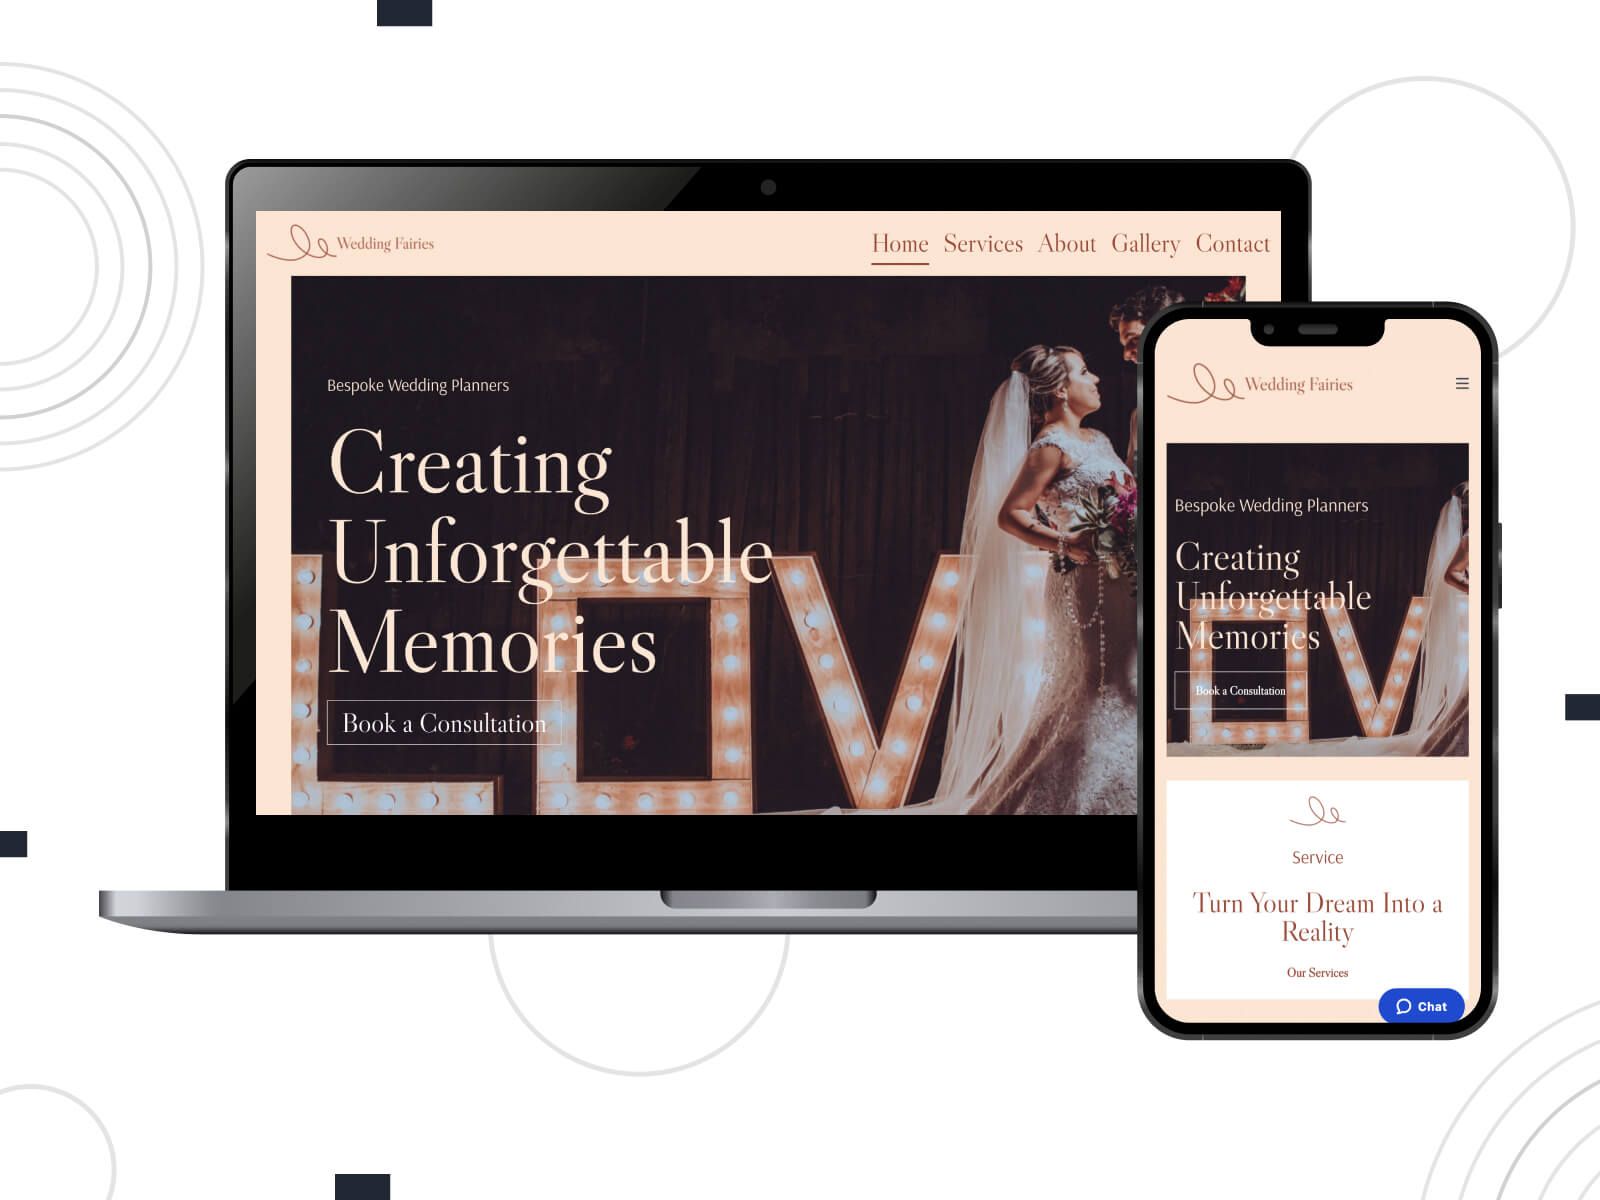 Picture of WeddingFairies - dim, rich, whimsical WordPress templates for weddings with playful designs and animations in dim gray, silver, and dark slate gray color gradation.